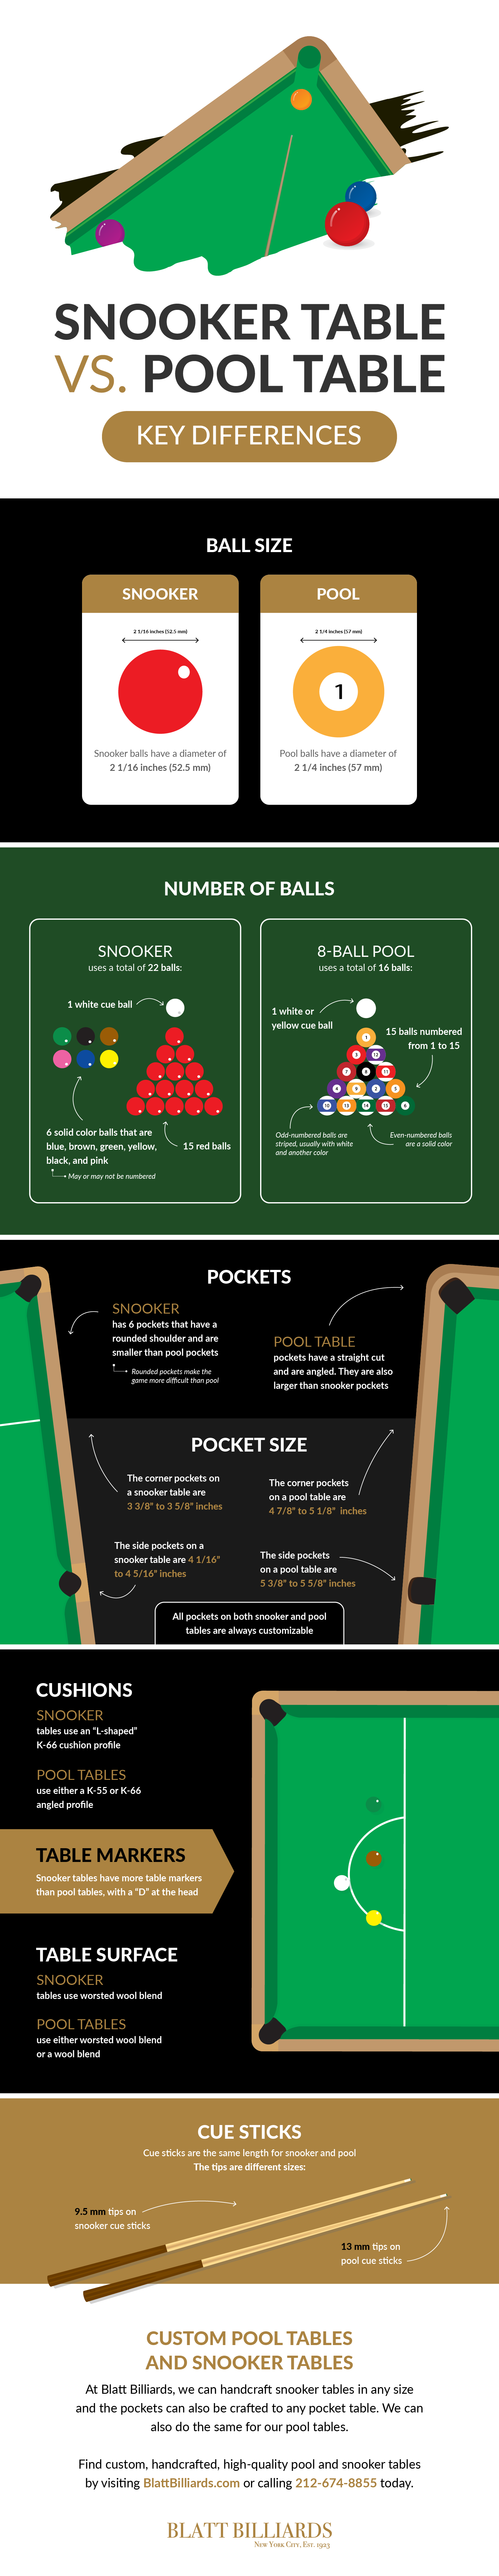 What Is the Difference Between a Snooker Table vs. a Pool Table Infographic